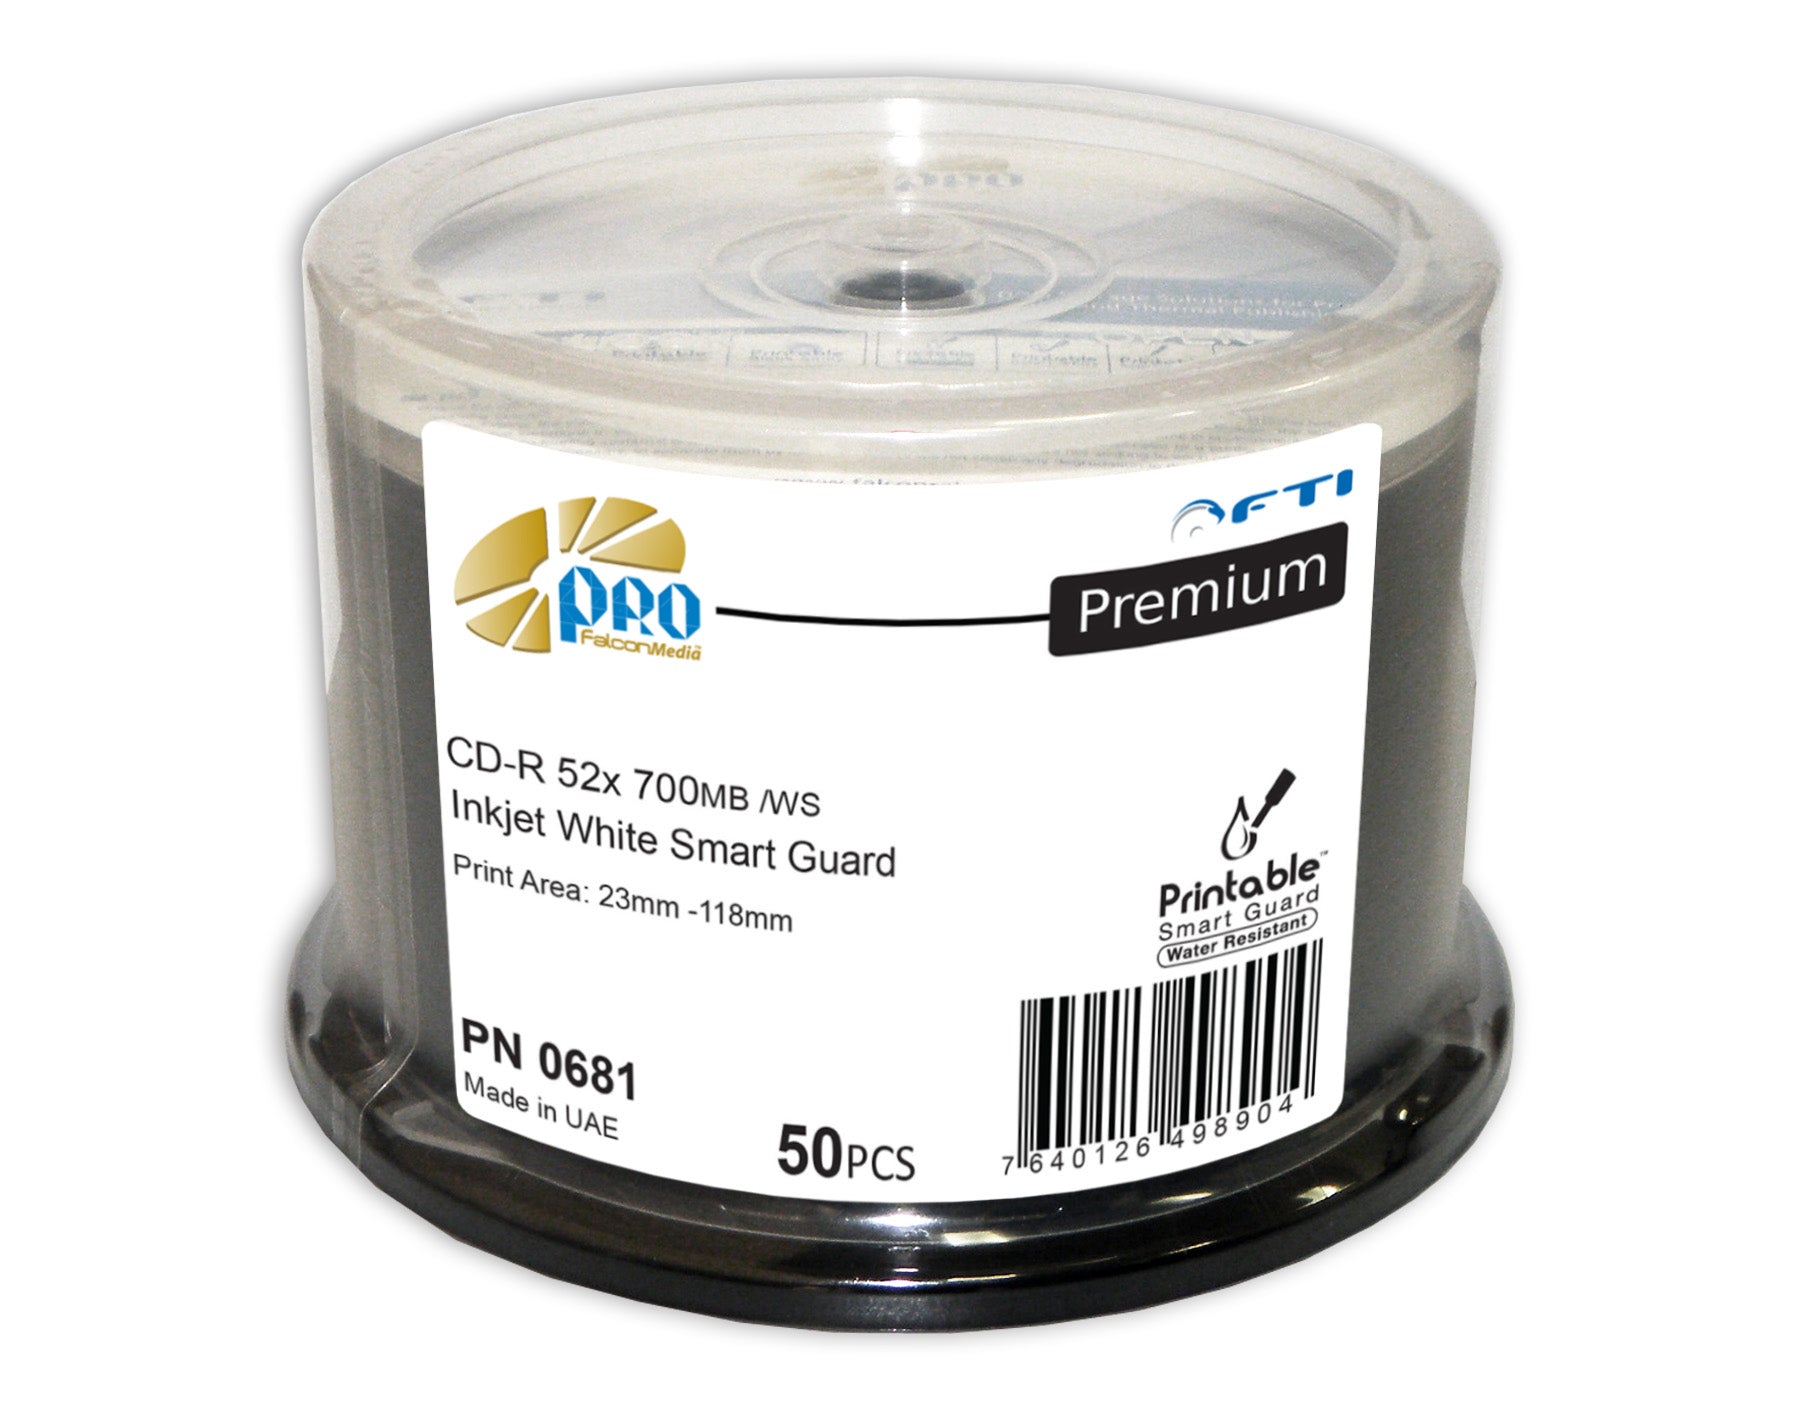 Falcon CD-R 700MB 52XSmart Guard White Inkjet Glossy Water Resistent 50pk Spindle MFR # 3090506504000681